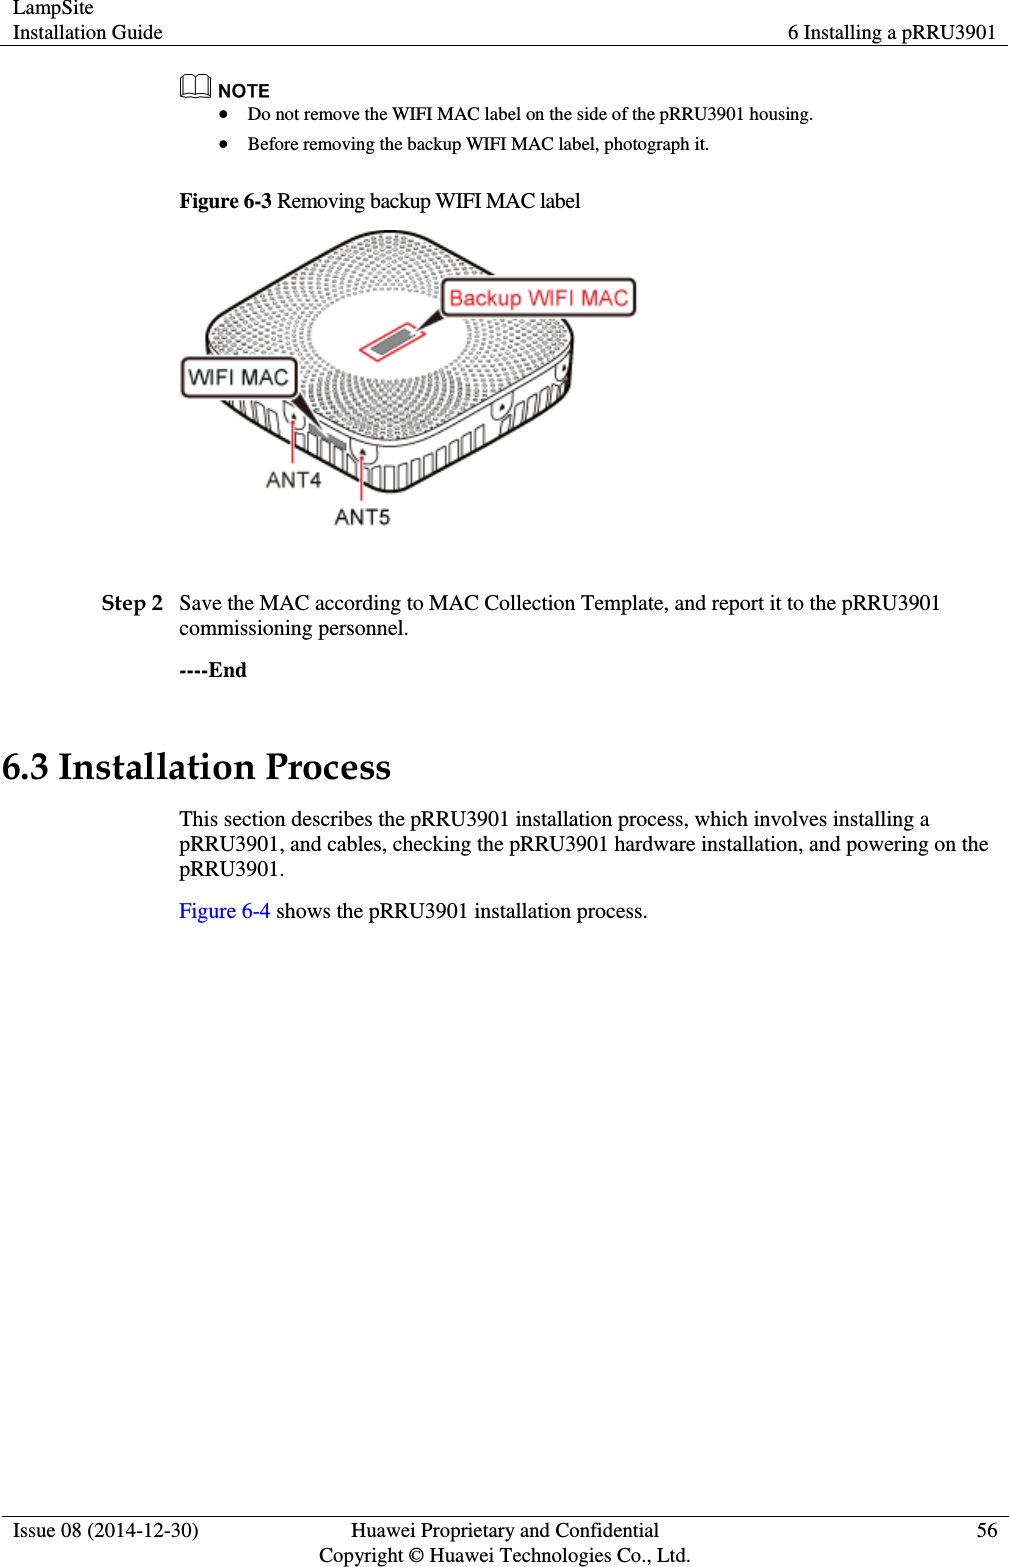 LampSite Installation Guide 6 Installing a pRRU3901  Issue 08 (2014-12-30) Huawei Proprietary and Confidential                                     Copyright © Huawei Technologies Co., Ltd. 56    Do not remove the WIFI MAC label on the side of the pRRU3901 housing.  Before removing the backup WIFI MAC label, photograph it. Figure 6-3 Removing backup WIFI MAC label   Step 2 Save the MAC according to MAC Collection Template, and report it to the pRRU3901 commissioning personnel. ----End 6.3 Installation Process This section describes the pRRU3901 installation process, which involves installing a pRRU3901, and cables, checking the pRRU3901 hardware installation, and powering on the pRRU3901.   Figure 6-4 shows the pRRU3901 installation process. 